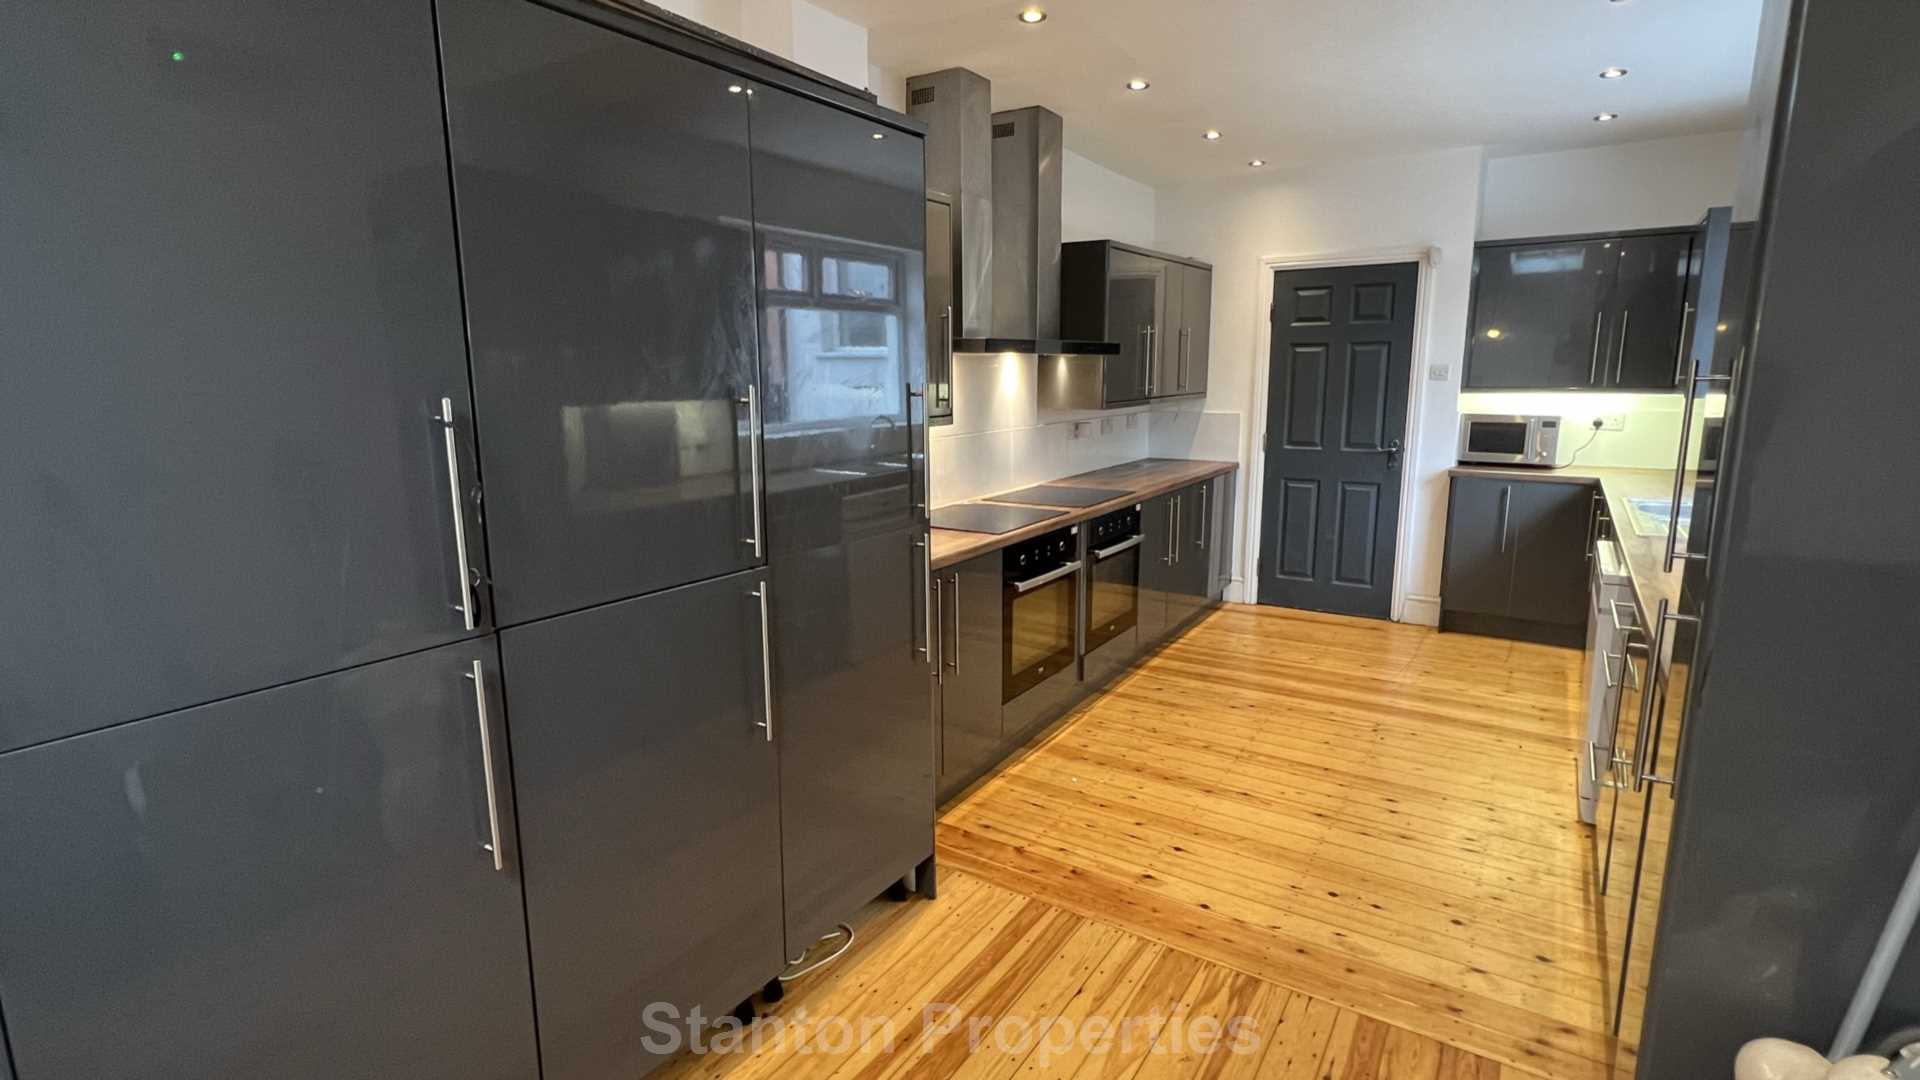 £150 PER WEEK / £650 PER MONTH, Lombard Grove, Manchester, Image 3